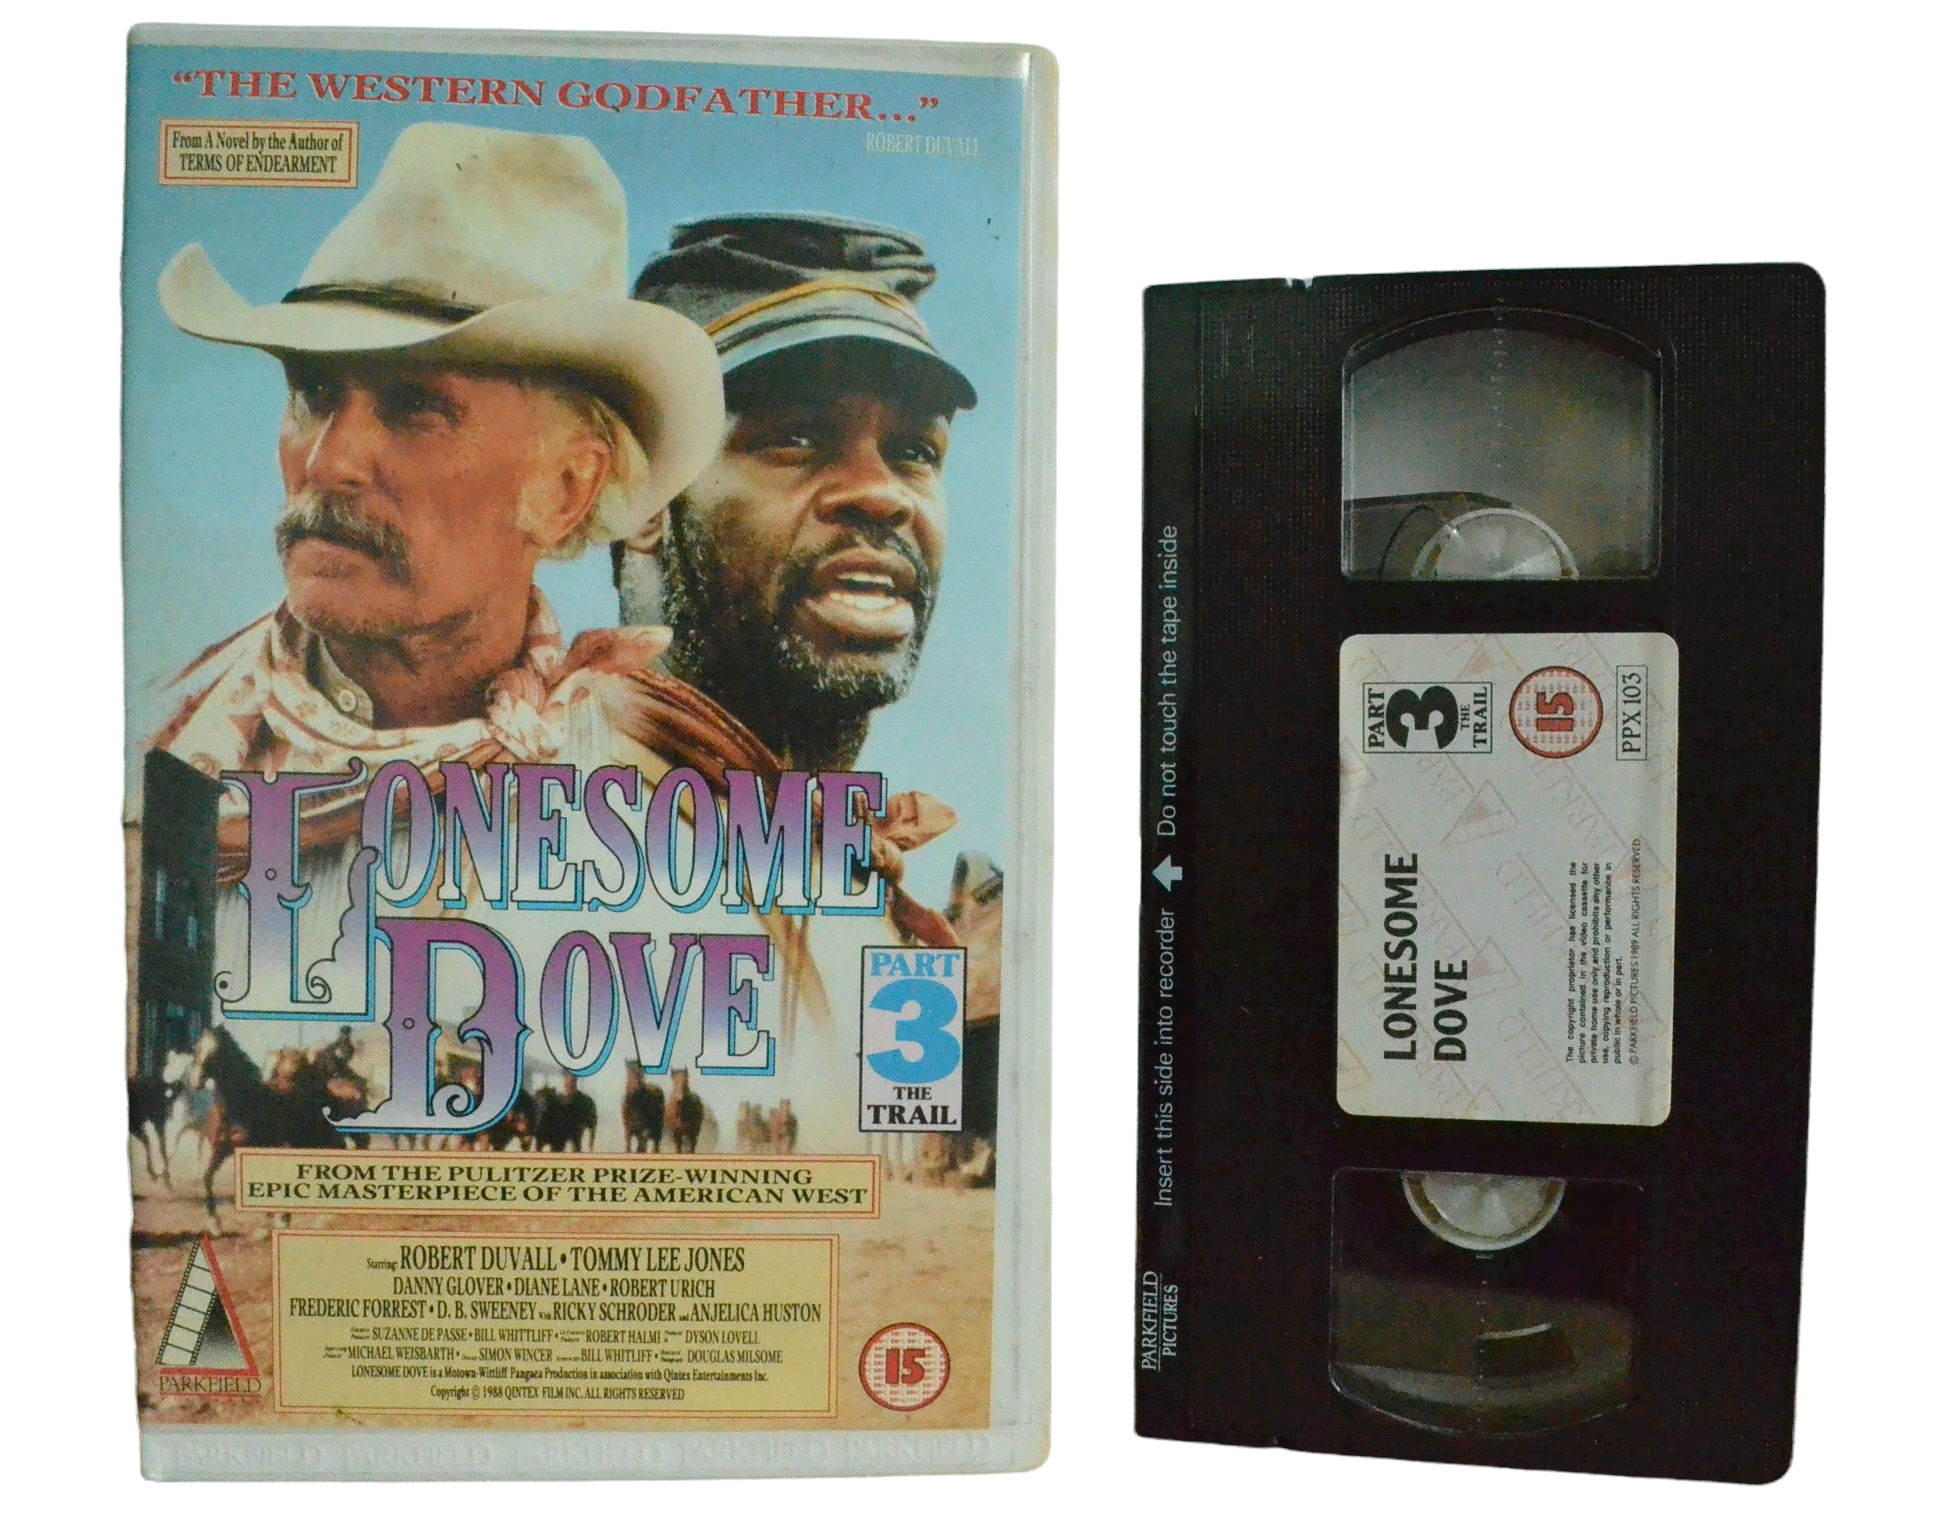 Lonsesome Dove - Part 3 - Robert Duvall - Parkfield - Vintage - Pal VHS-